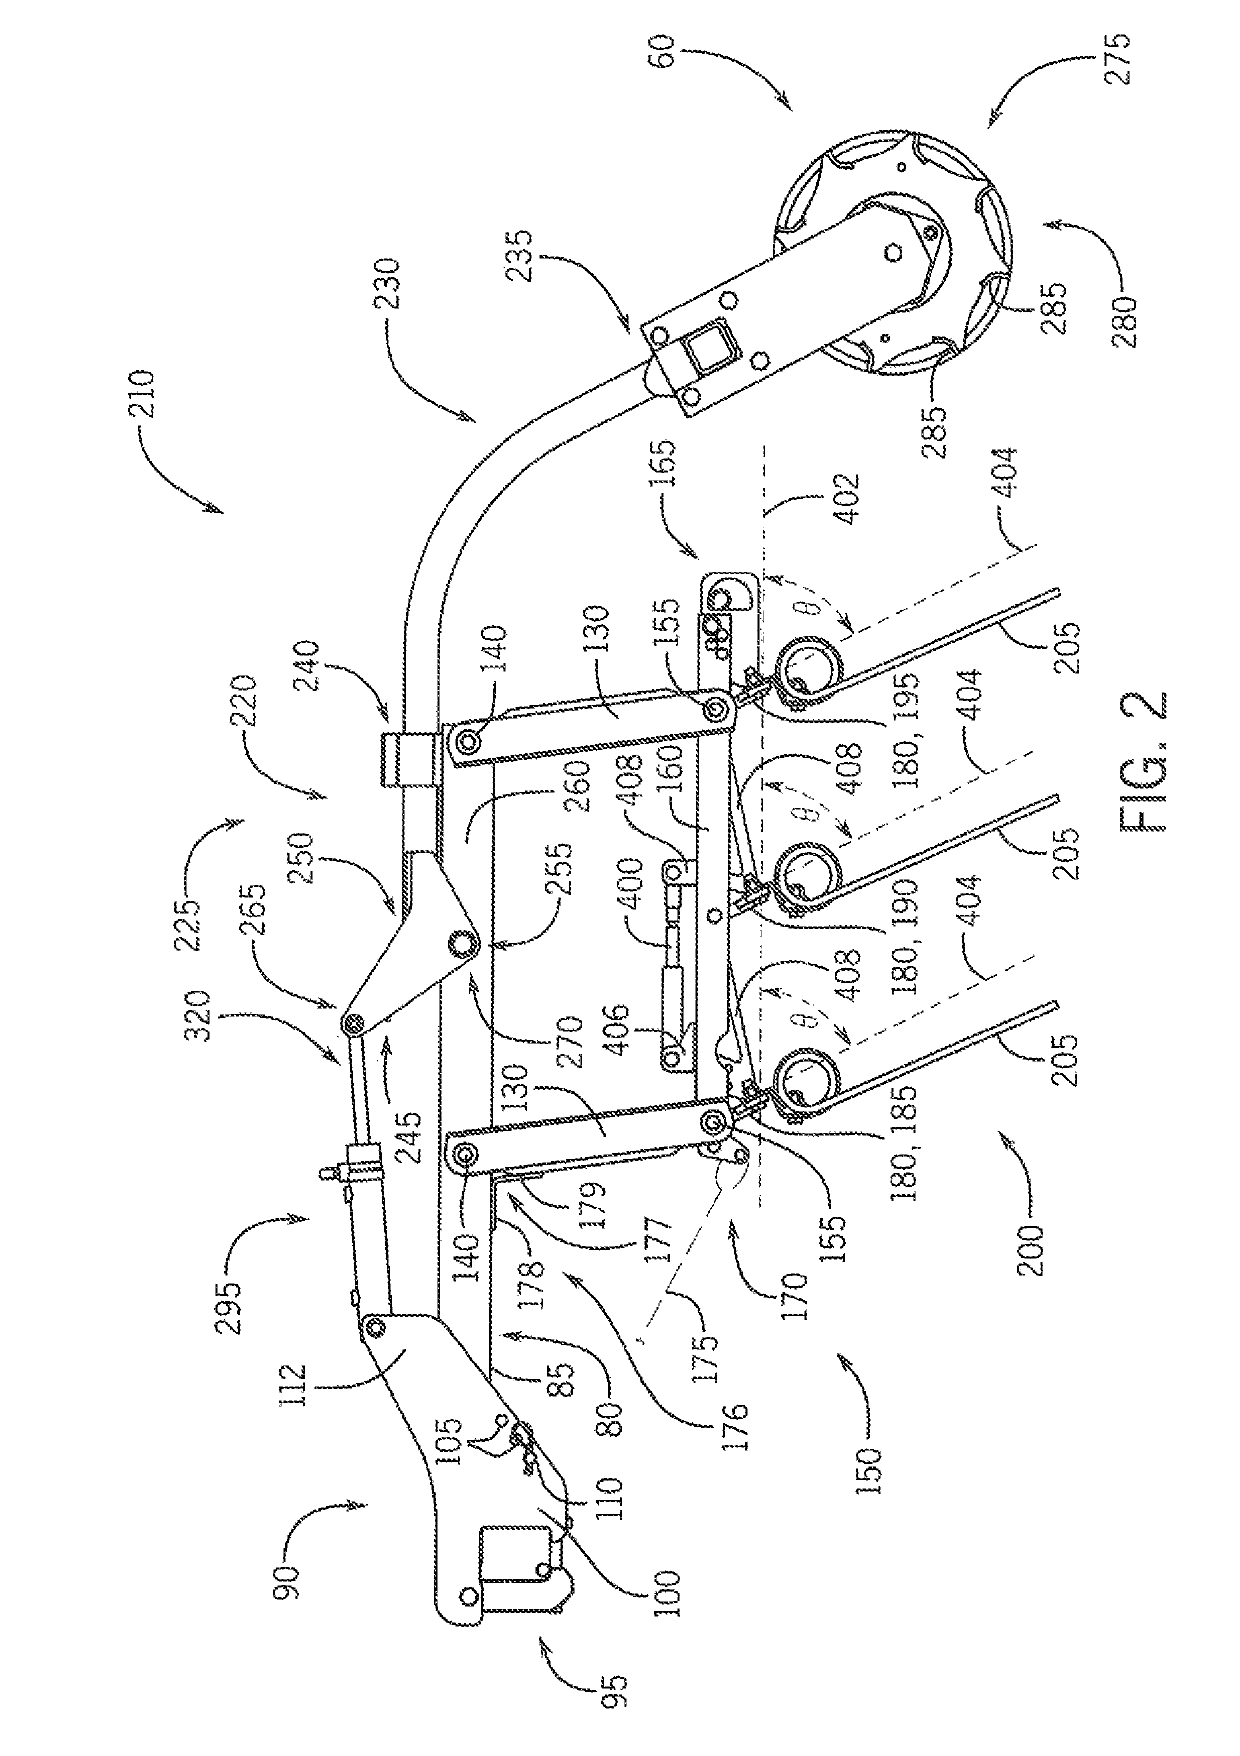 System for equalizing pressure on smoothing tools of a harrow